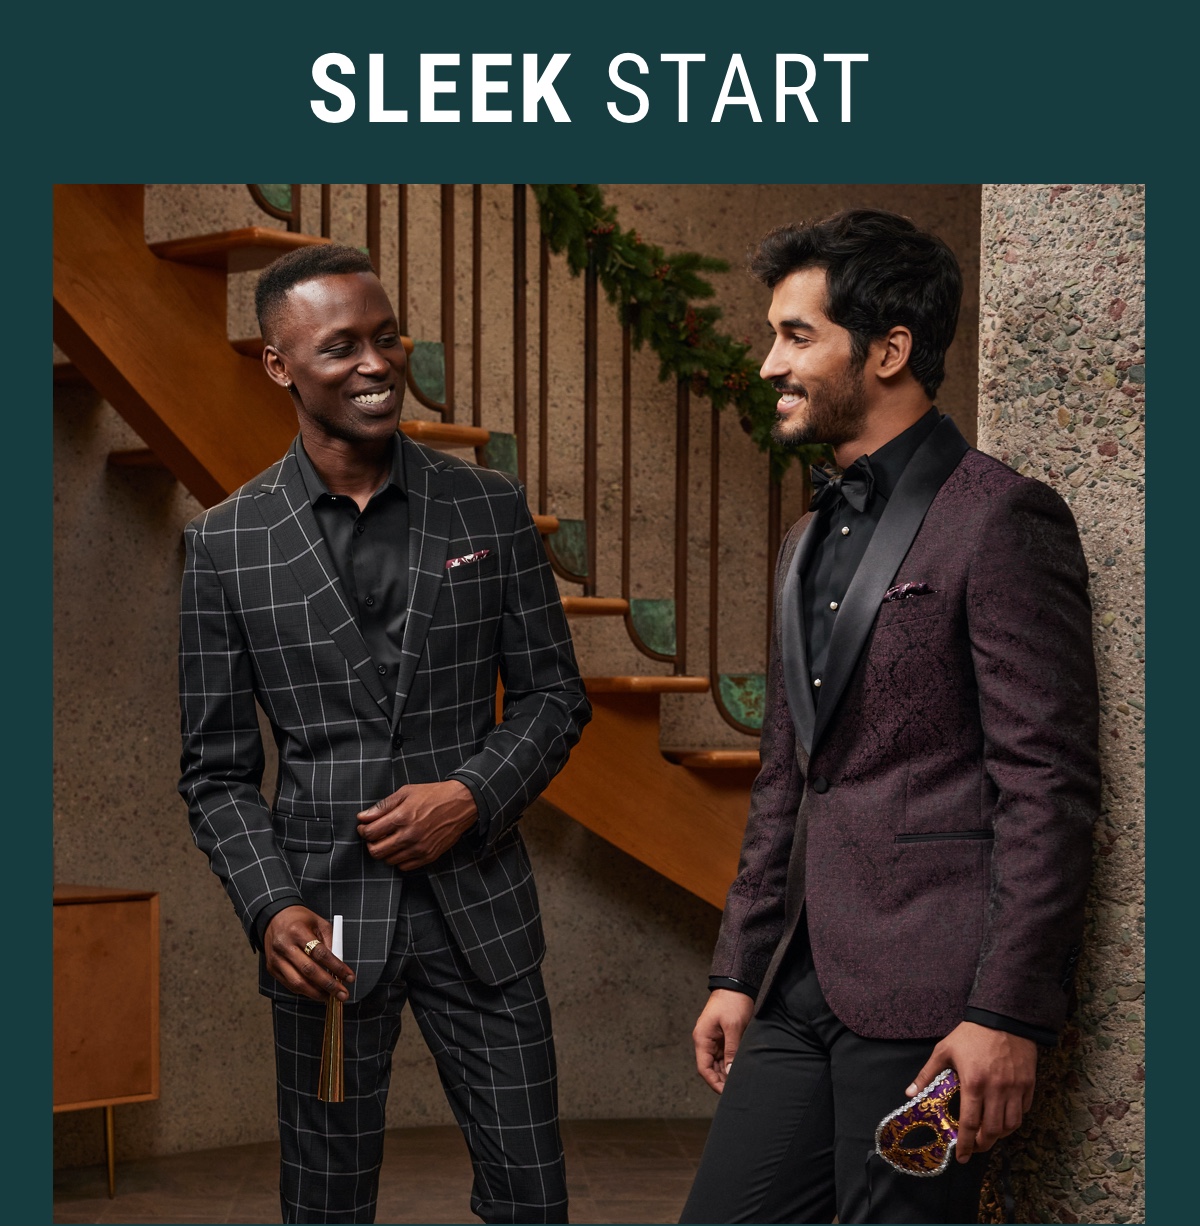 Sleek Start Kick off the New Year in a stand-out look that celebrates your unique style